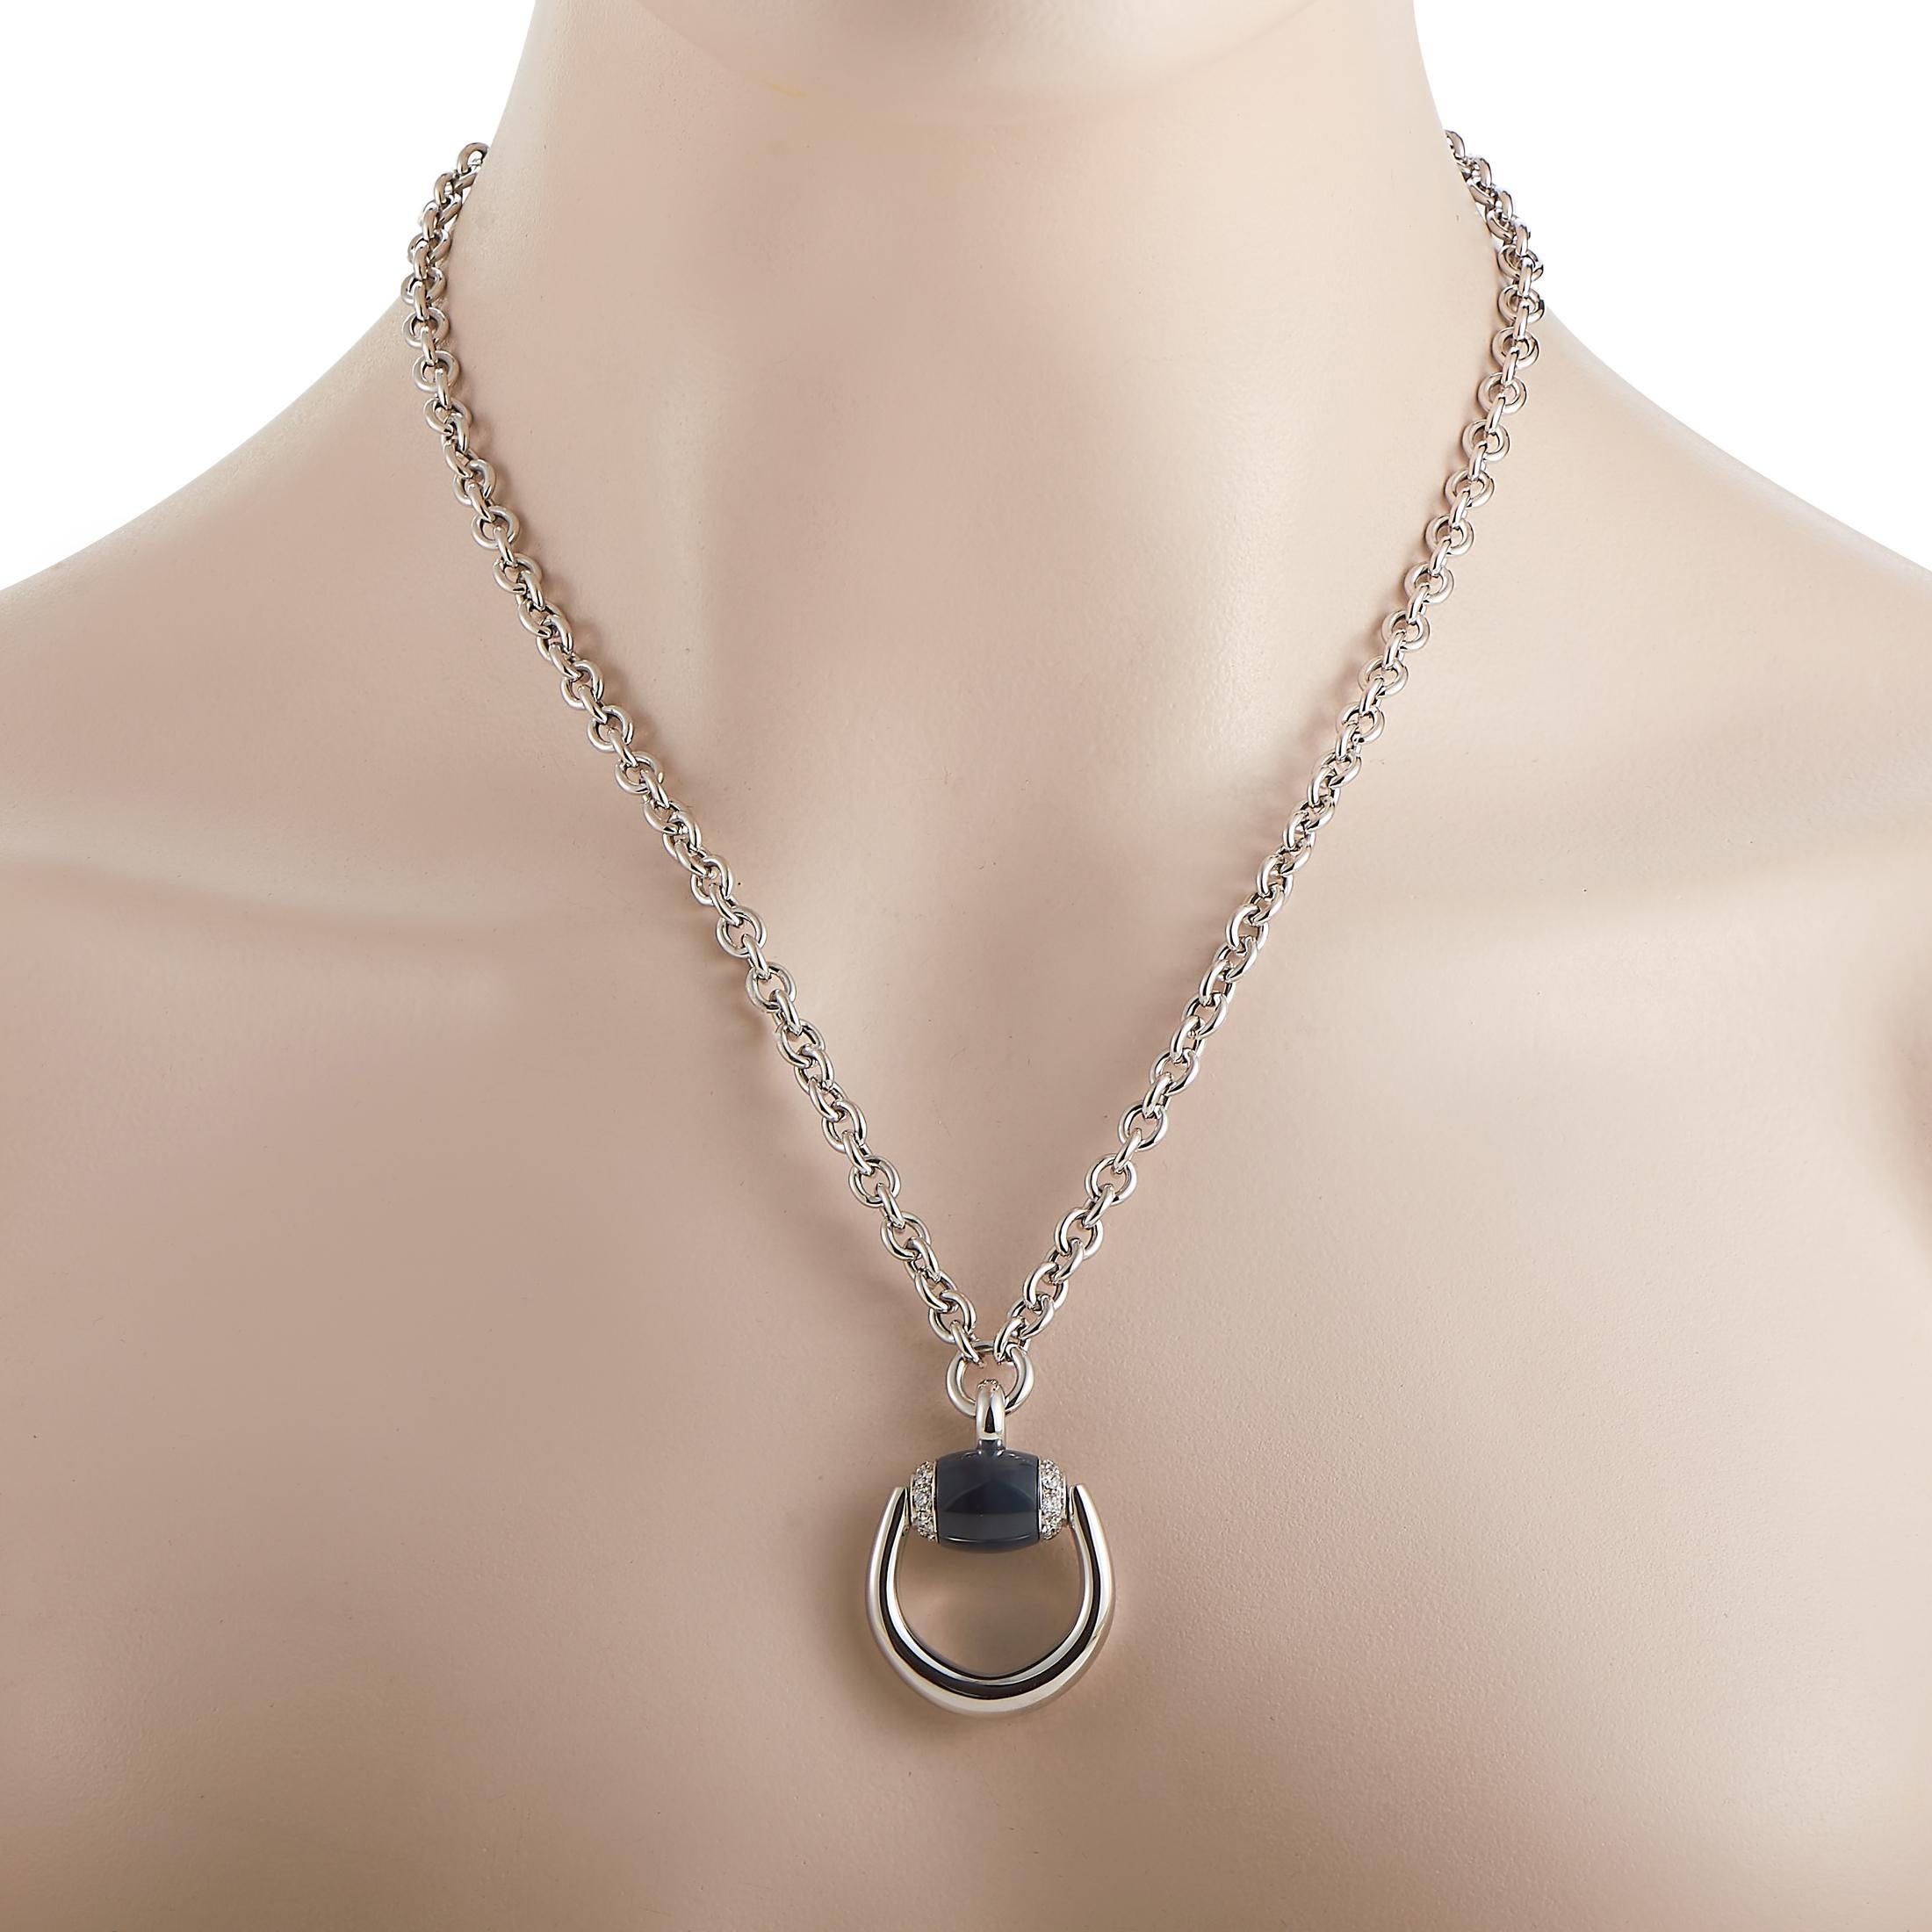 Sleek and elegant, this iconic Gucci Horsebit necklace is an understated piece that will never go out of style. An 18K White Gold pendant measuring 1.5” long and 1.15” wide makes a statement thanks to a glossy black onyx gemstone, which is also